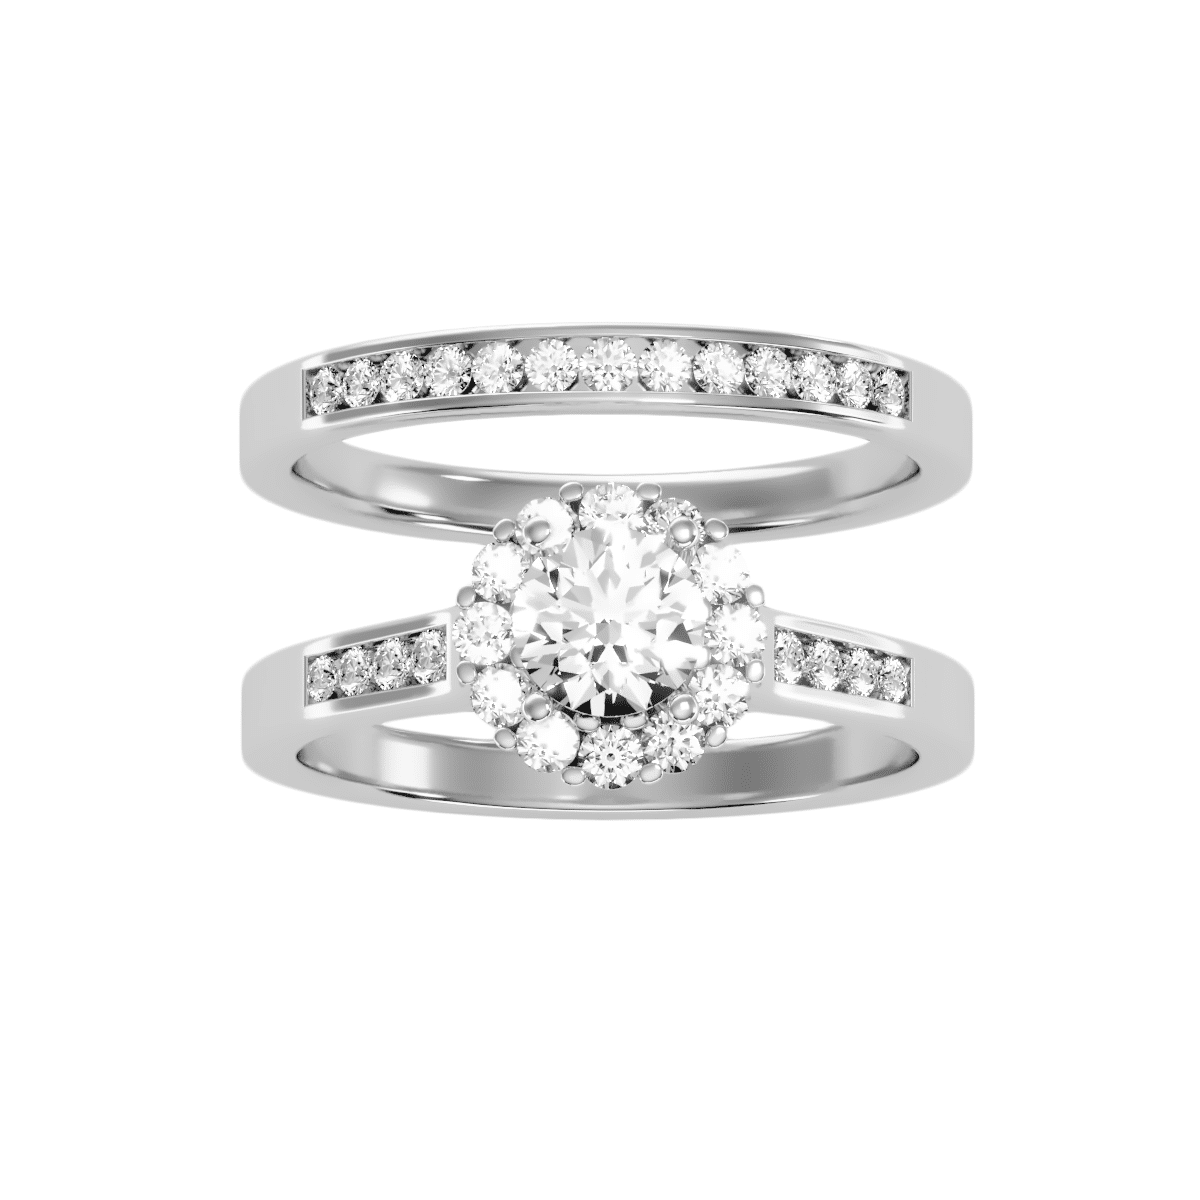 Round Cut Halo Channel-Set With Matching Wedding Band